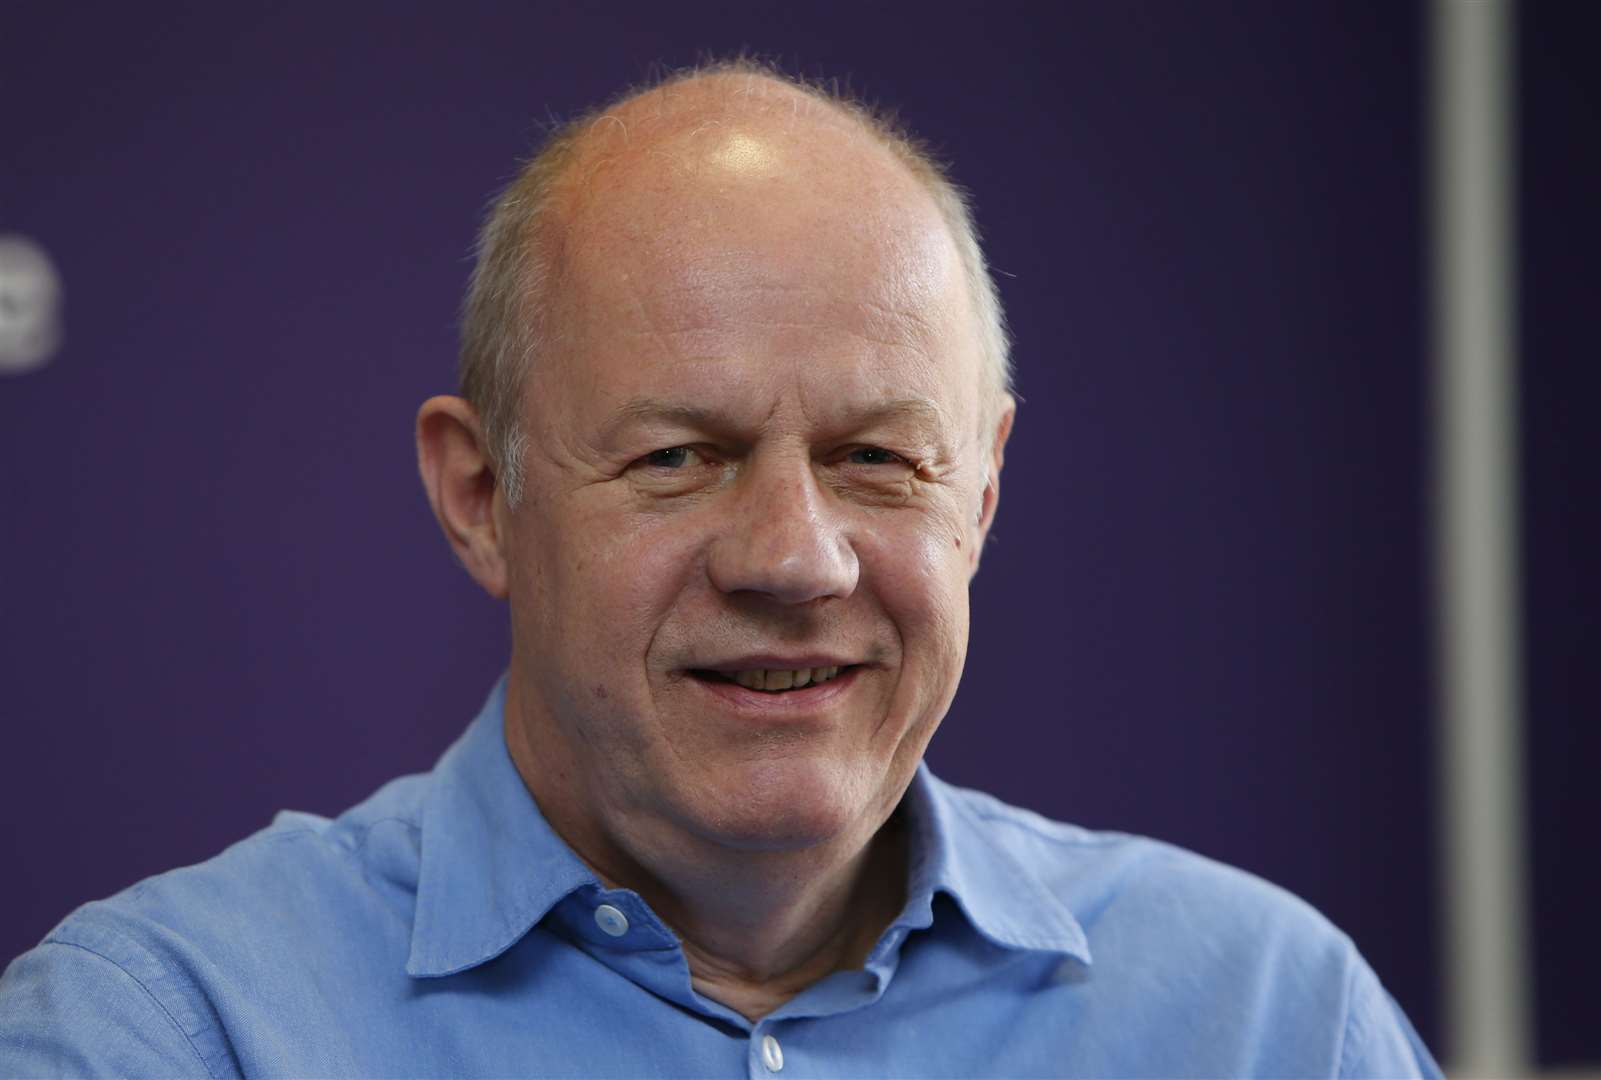 Damian Green has spent the last 22 years as Ashford's MP